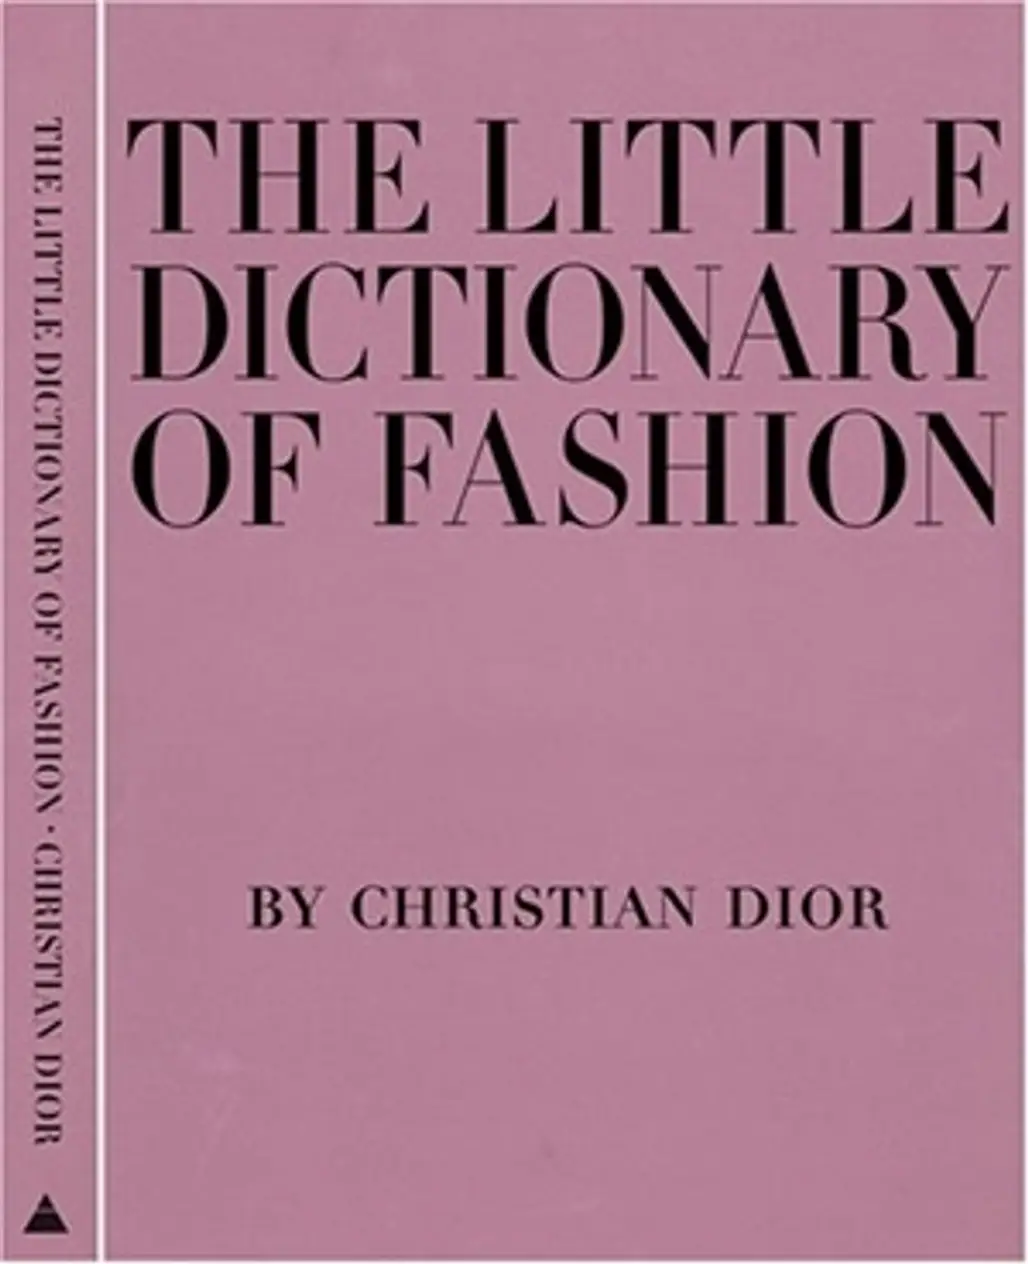 The Little Dictionary of Fashion by Christian Dior